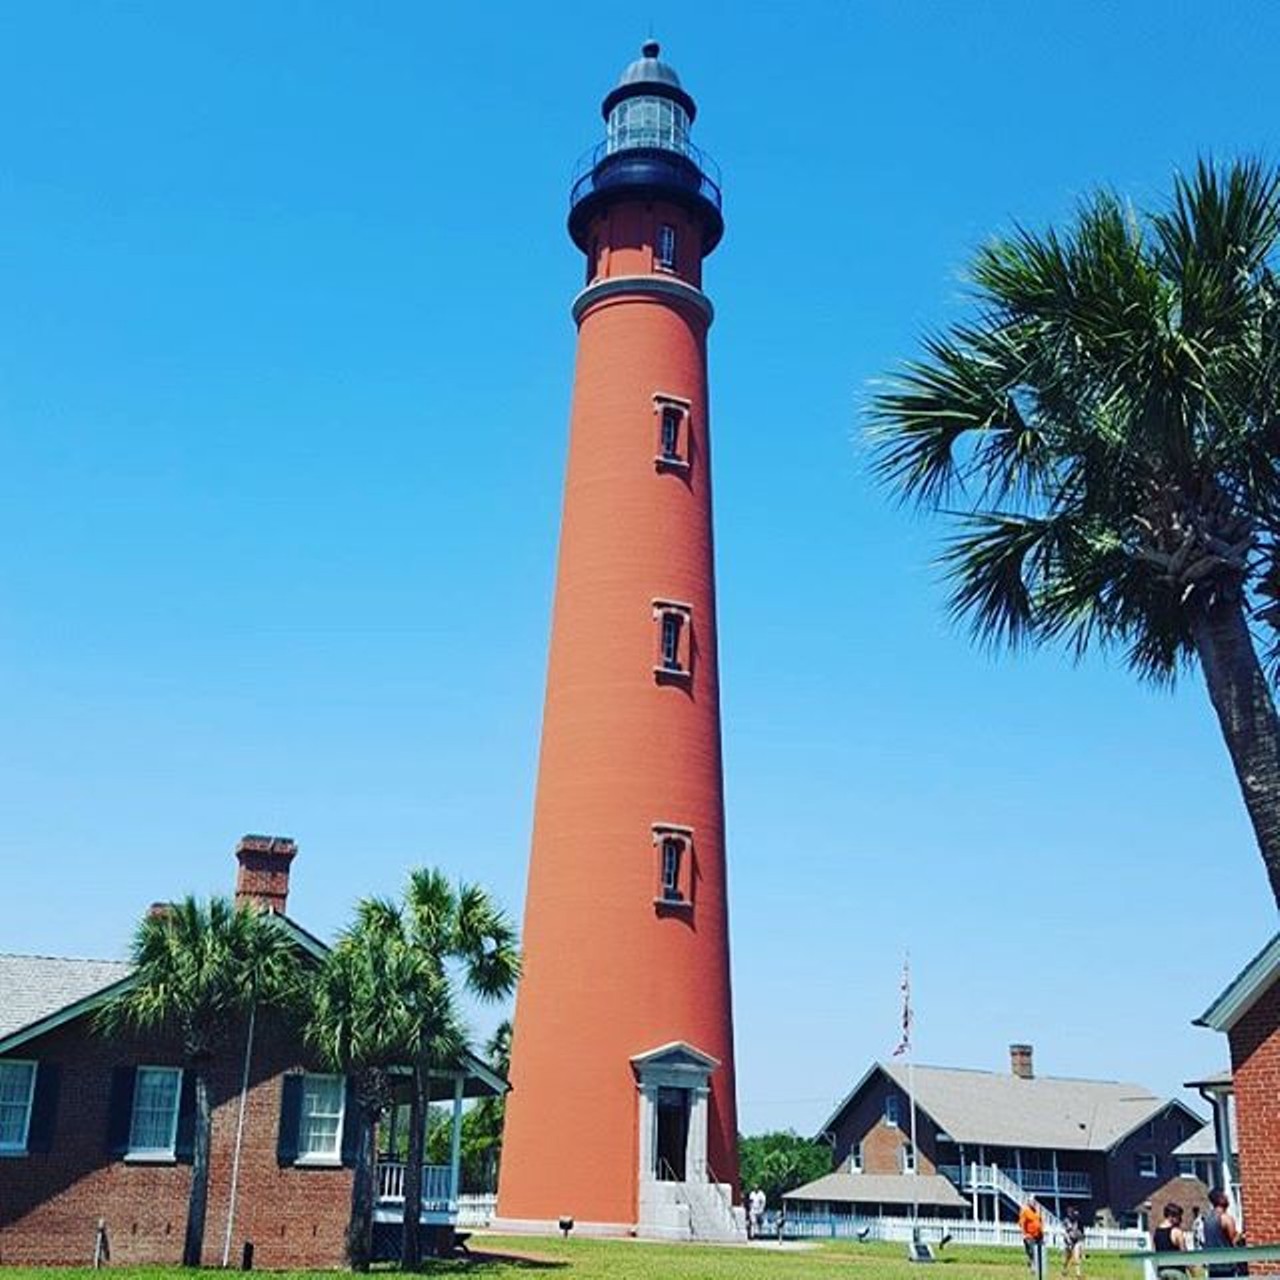 Ponce de Leon Light Station
4931 South Peninsula Drive, Ponce Inlet 386-761-1821
Distance from Orlando: 1 hour and 20 minutes
The lighthouse was built in 1887. It is the tallest in Florida and the second tallest in the country. They offer tours at certain times during the week.
Photo via czarcangemi/Instagram